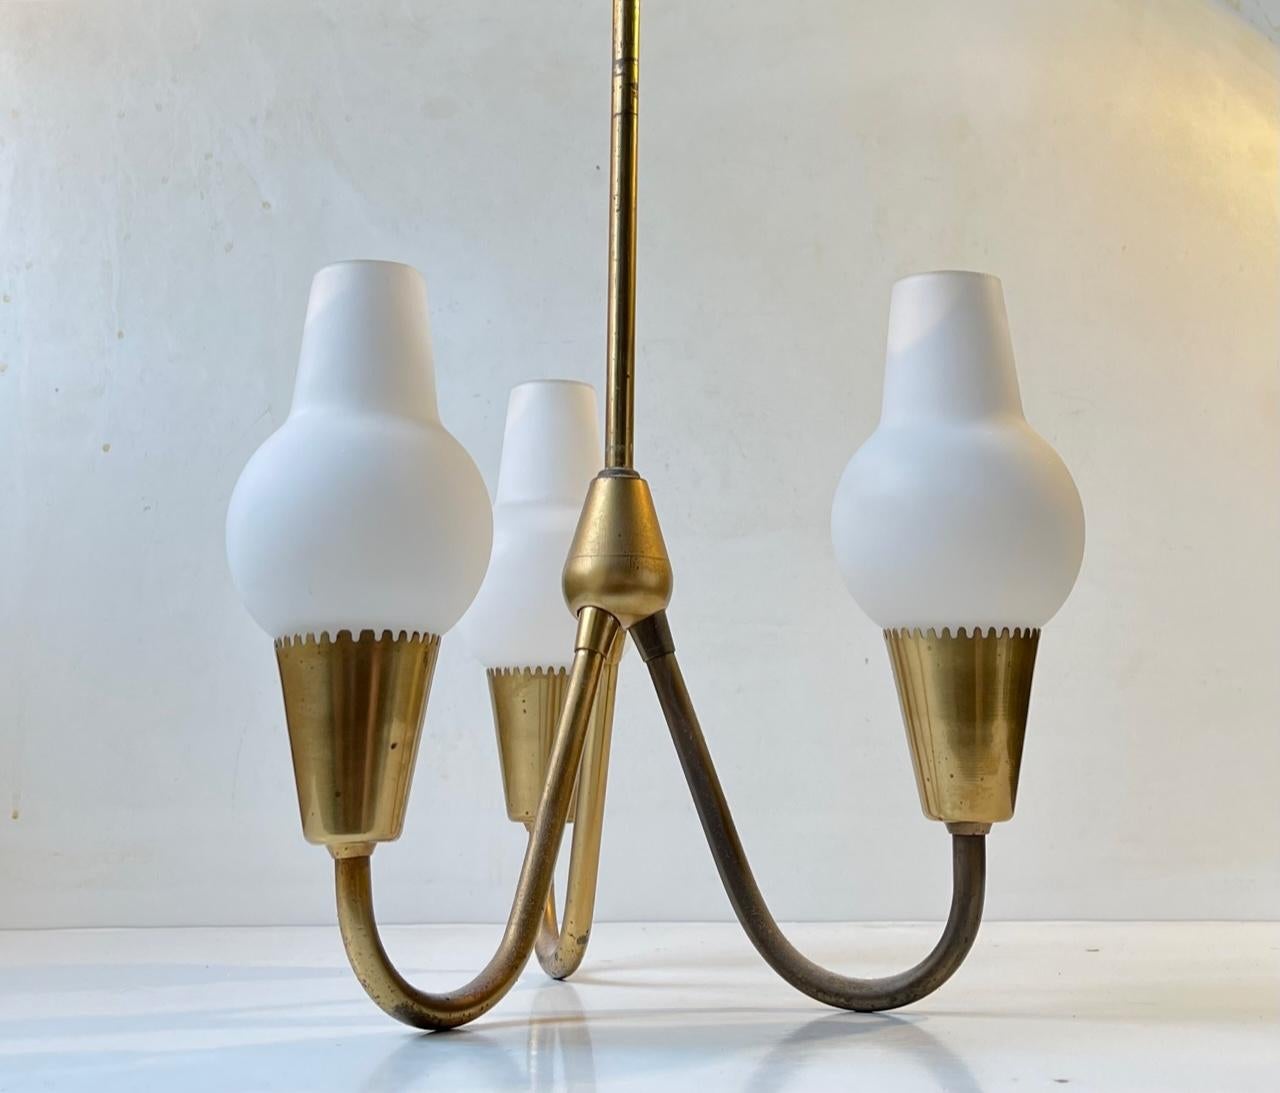 A small beautifully crafted 3-shaded hanging lamp with subtle mid-century detailing. It was designed by Bent Karlby and manufactured by Lyfa in Denmark during the 1950s, stylistically it is very much in line with similar fixtures by Paavo Tynell and